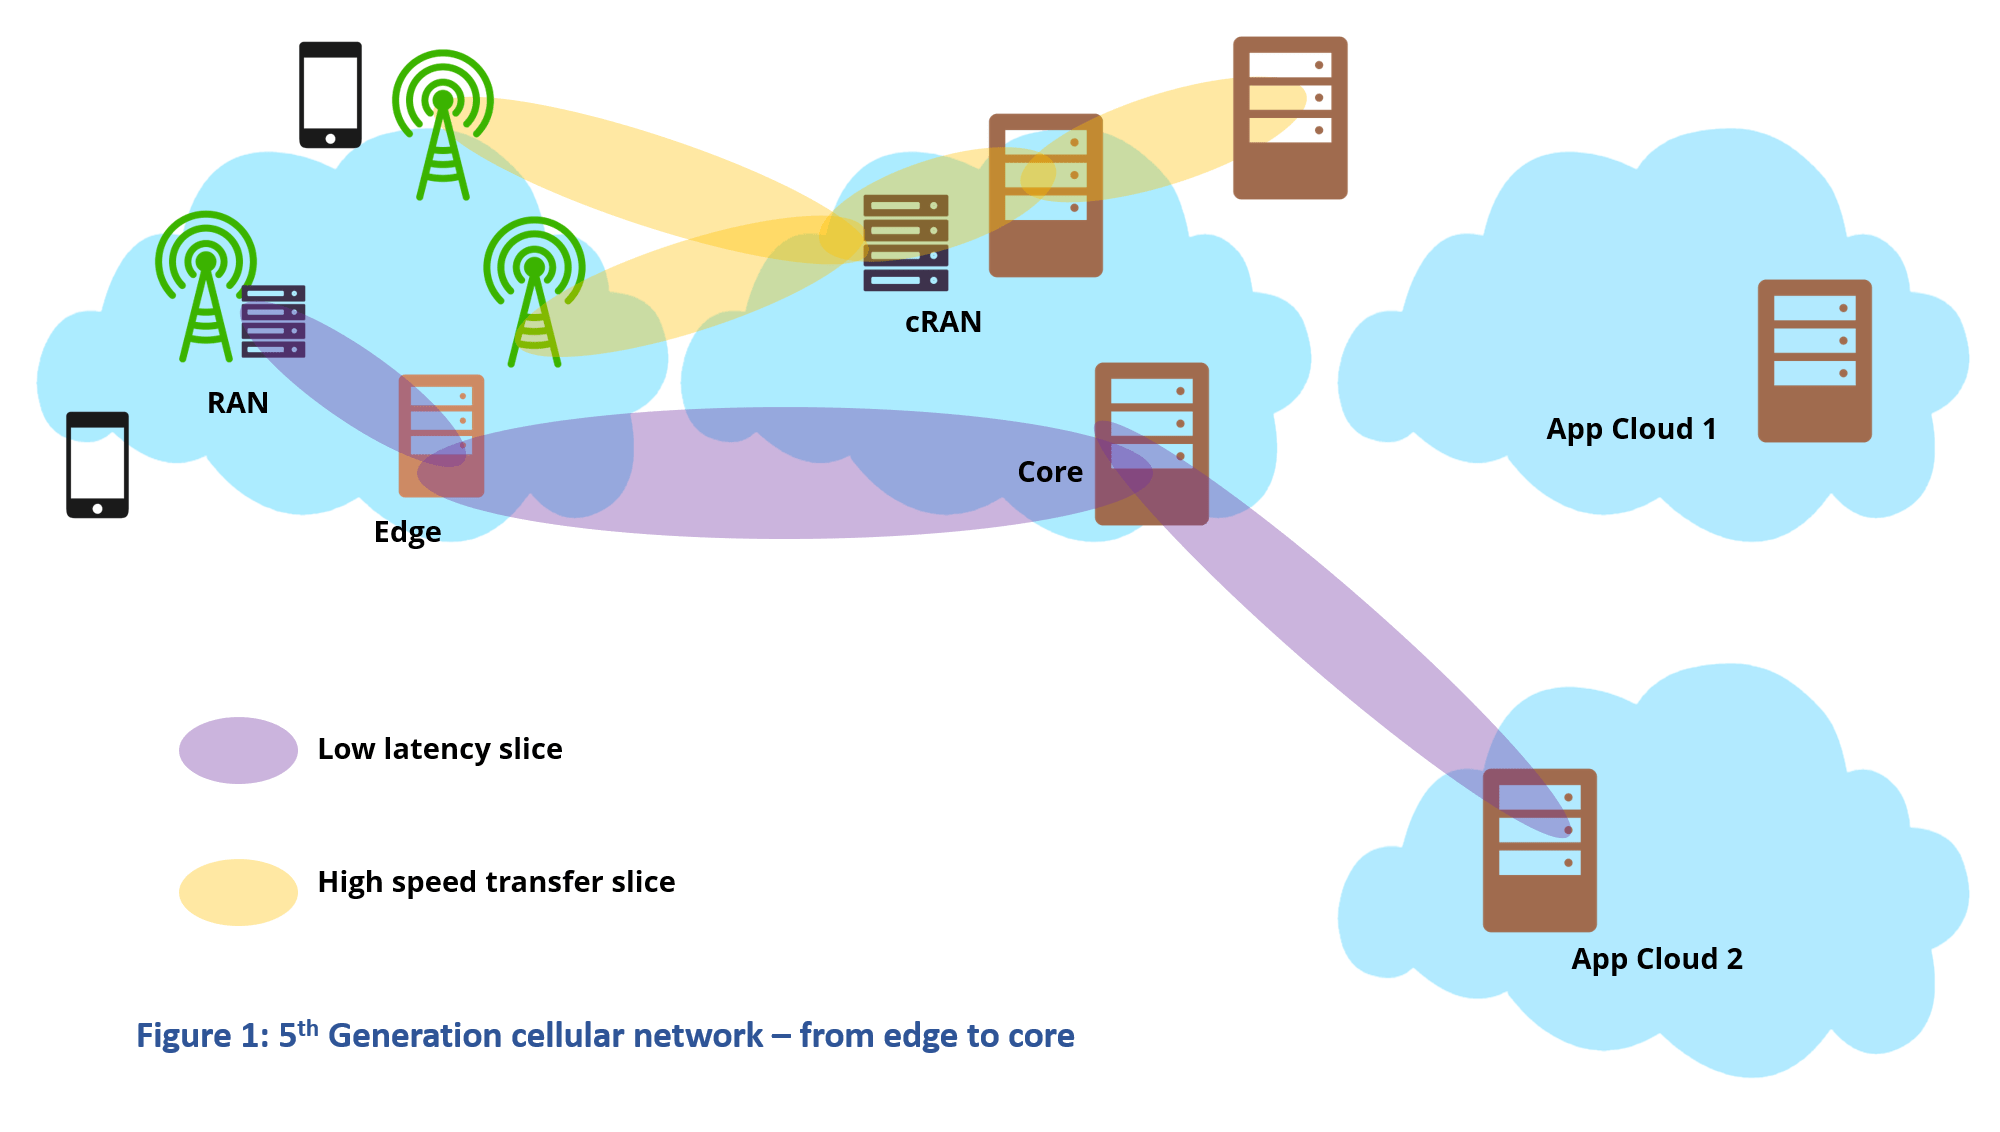 fig 1 5th Generation cellular network from edge to core